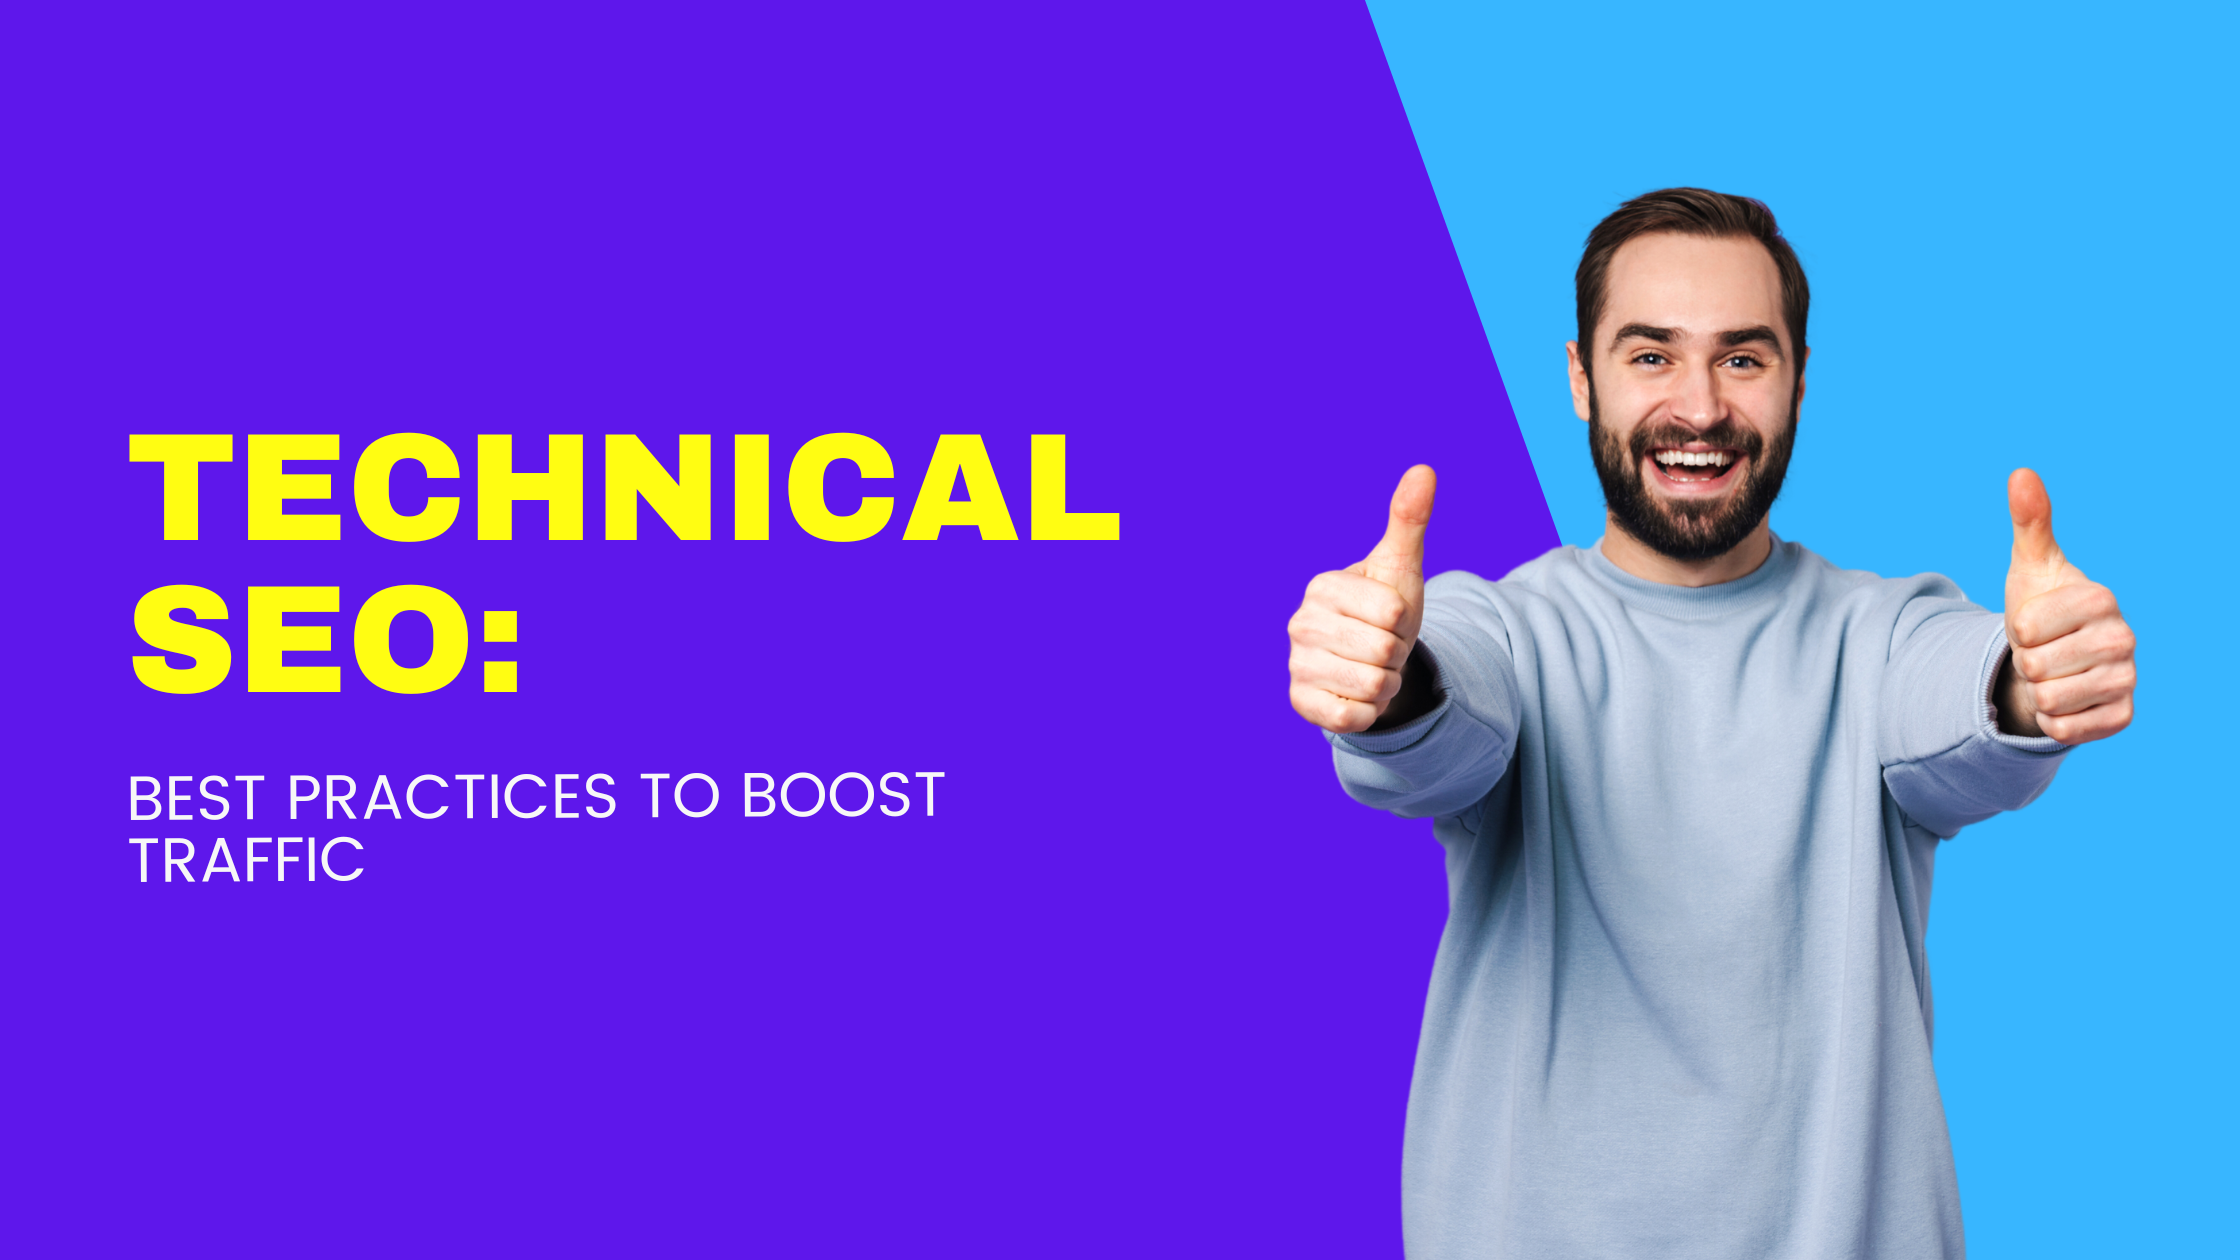 What is Technical SEO? Learn 5 Best Practices to Boost Your Site Traffic